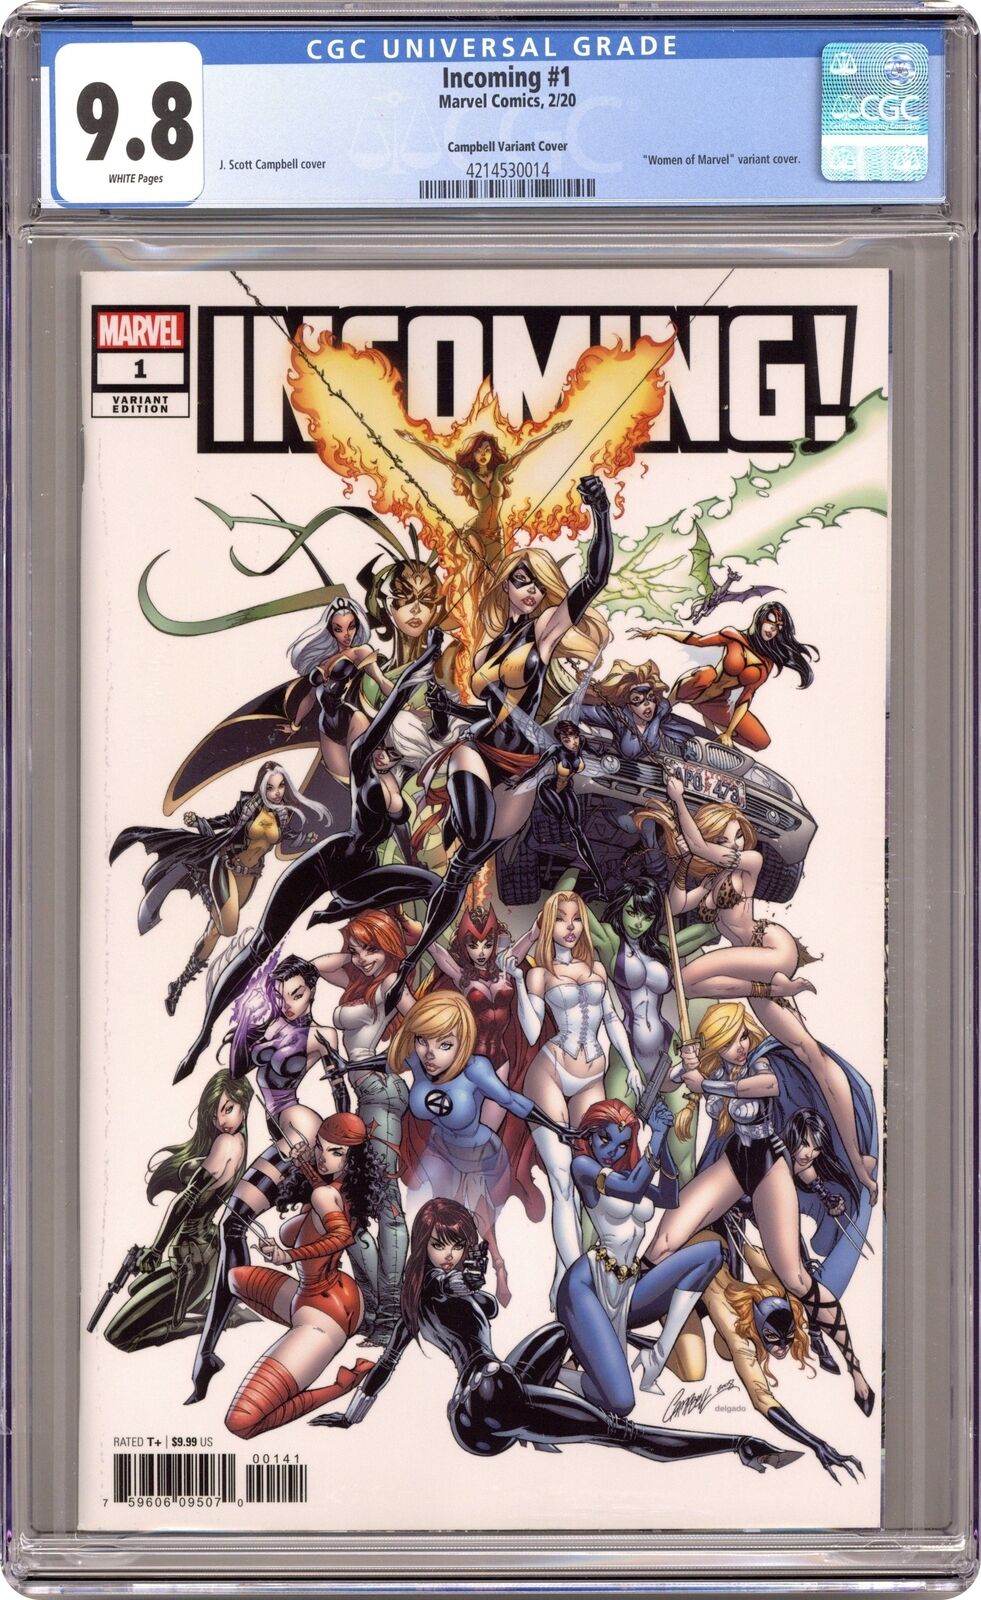 Incoming 1F Campbell 1:500 Variant CGC 9.8 2020 4214530014